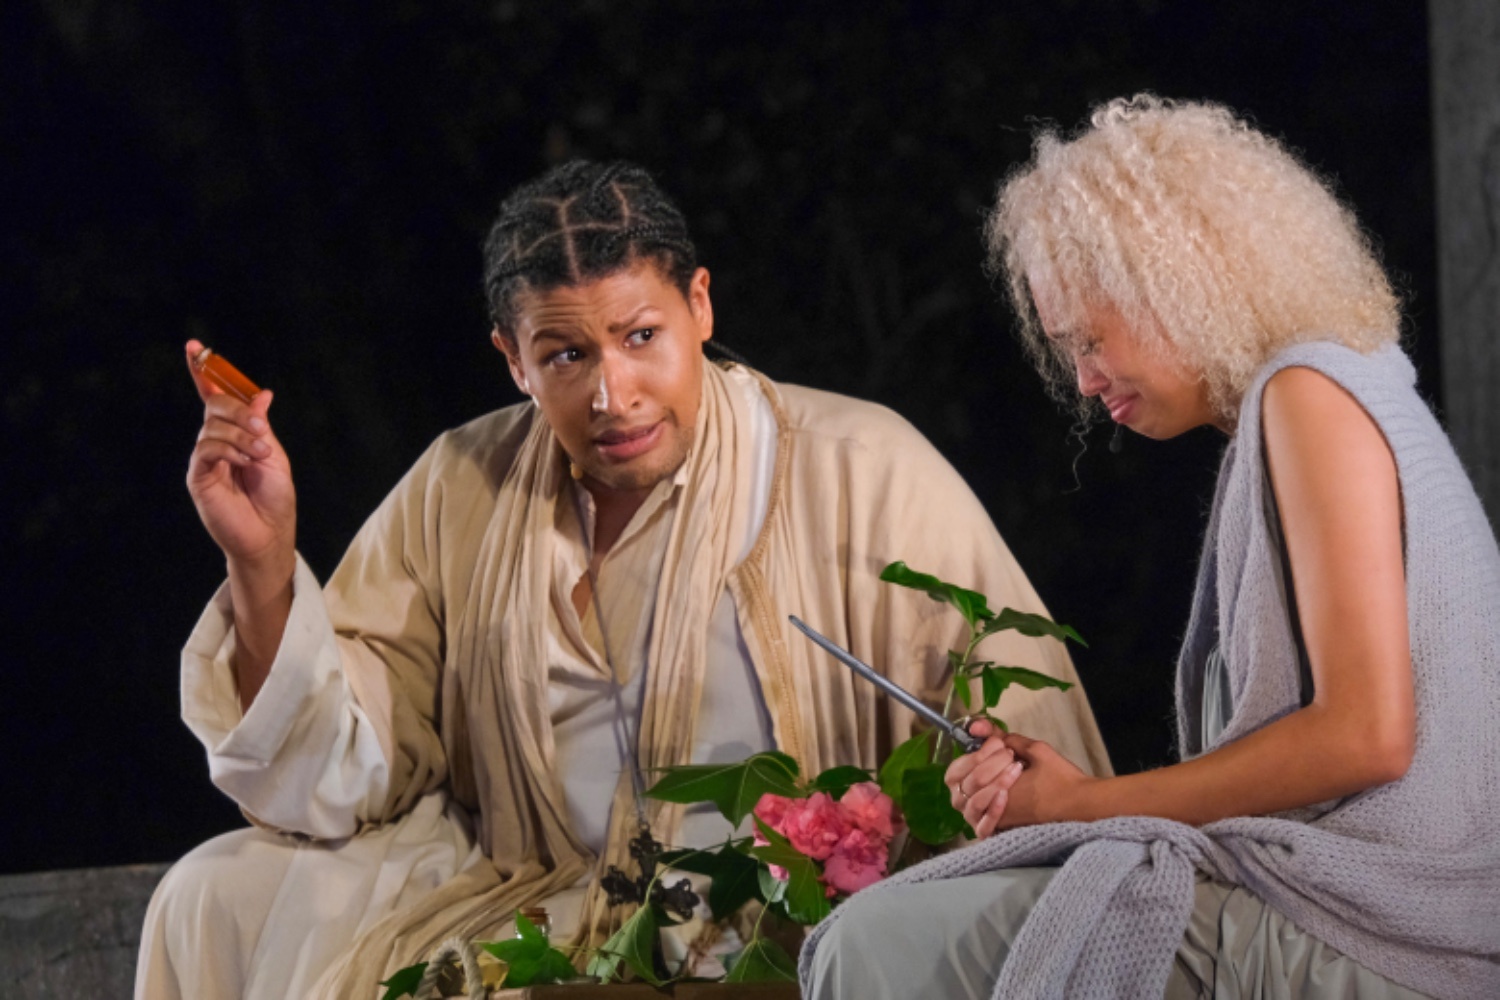 Cleo Wesley as Friar Lawrence and Simone Neethling as Juliet in Maynardville's production of 'Romeo and Juliet' playing until 24 February. Image: Eric Miller